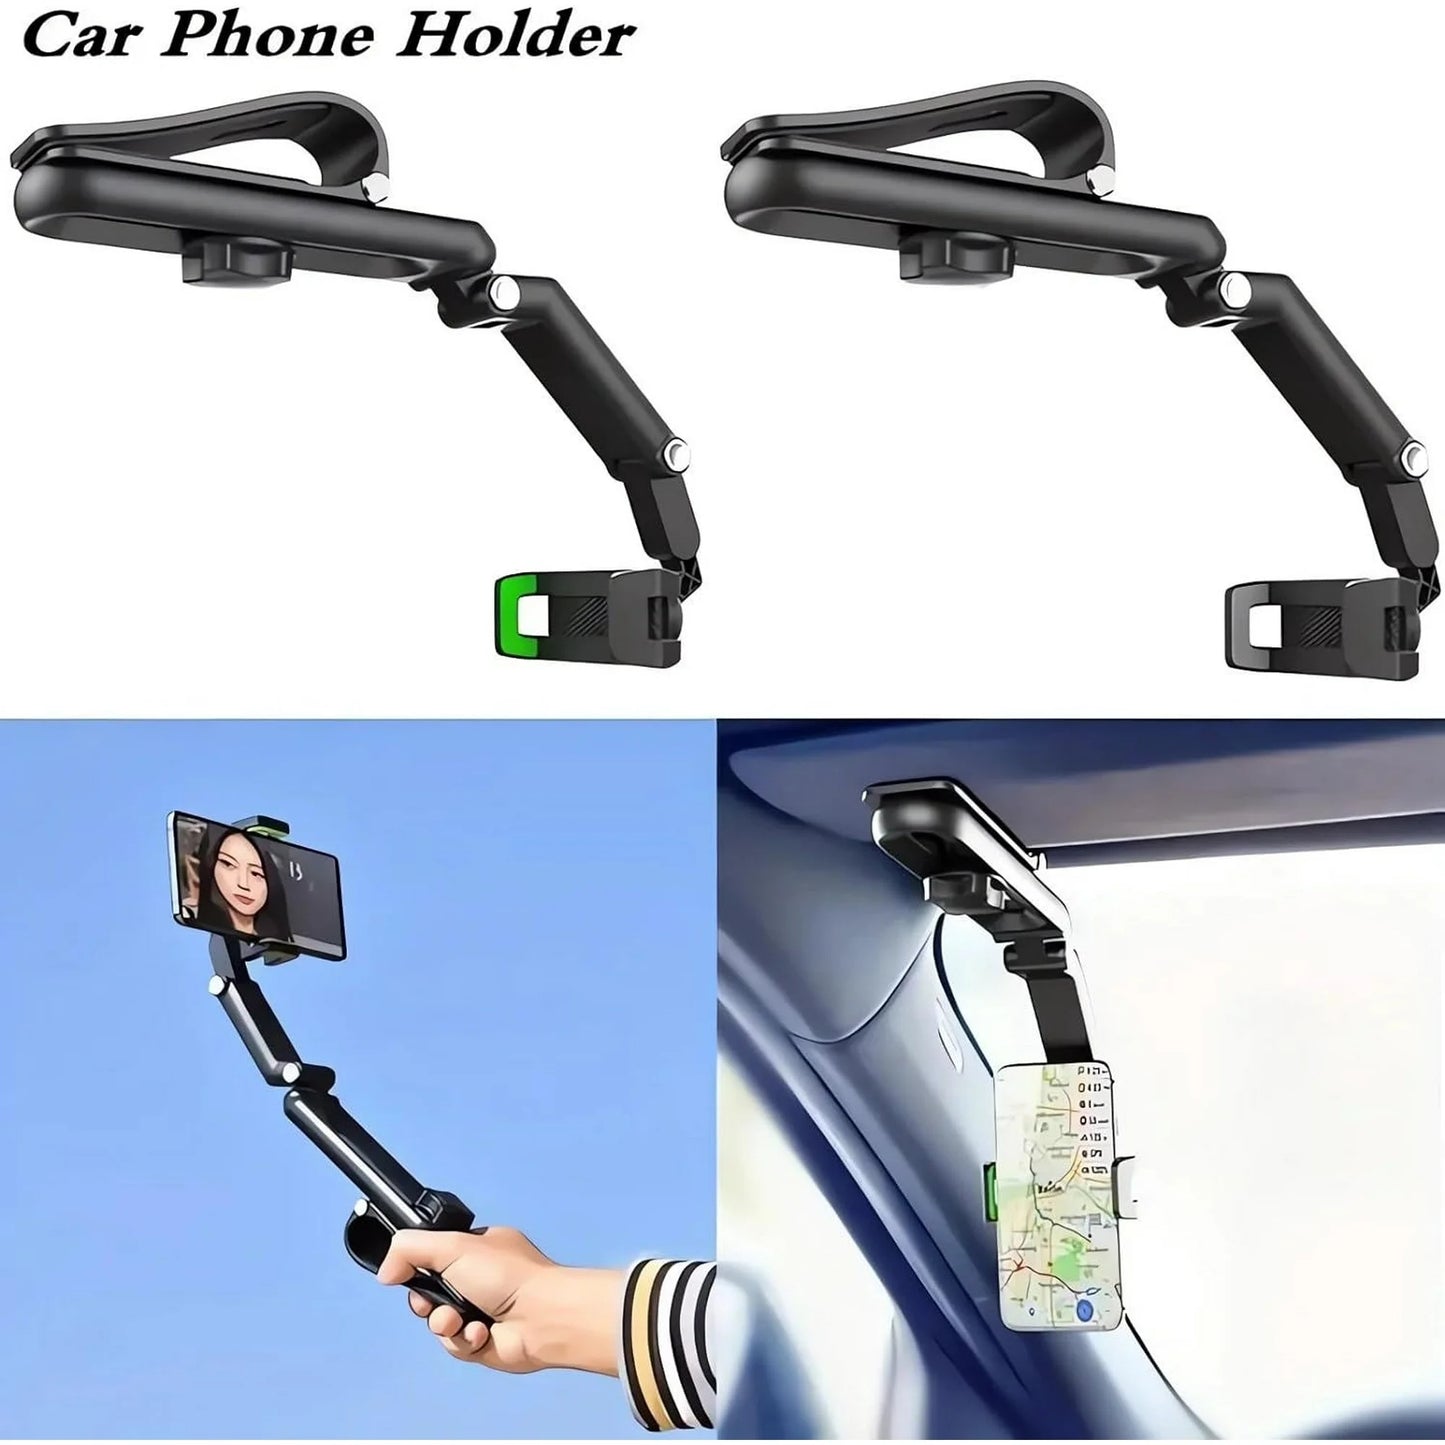 Car Phone Holder Universal 360 Rotating Phone Holder for Car, Cell Phone Car Holder Mobile Mount for Vehicle Rear View Mirror